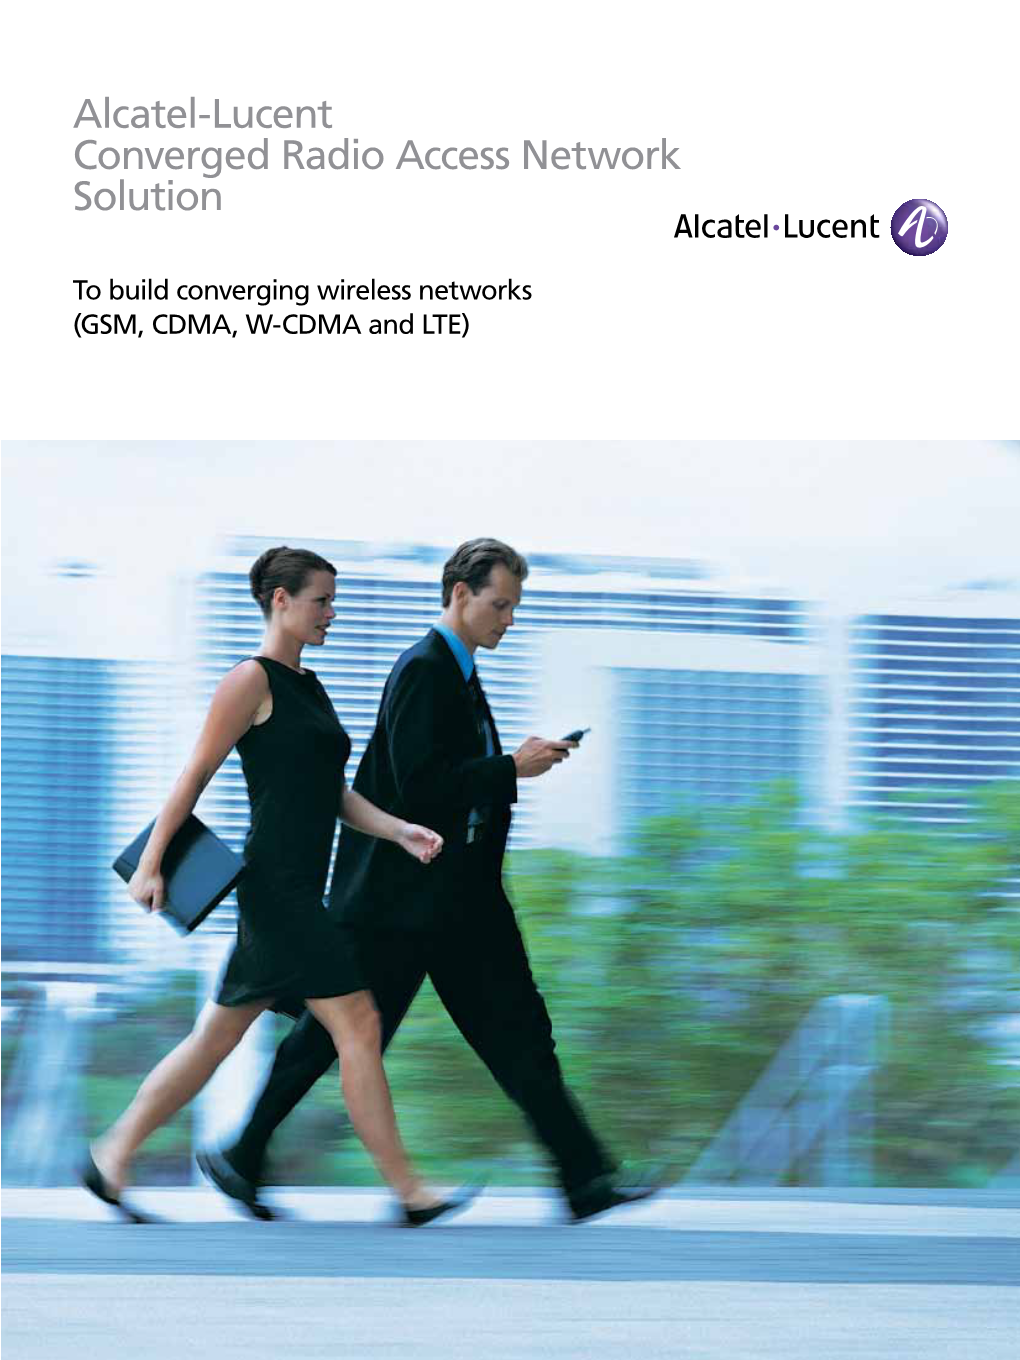 Alcatel-Lucent Converged Radio Access Network Solution